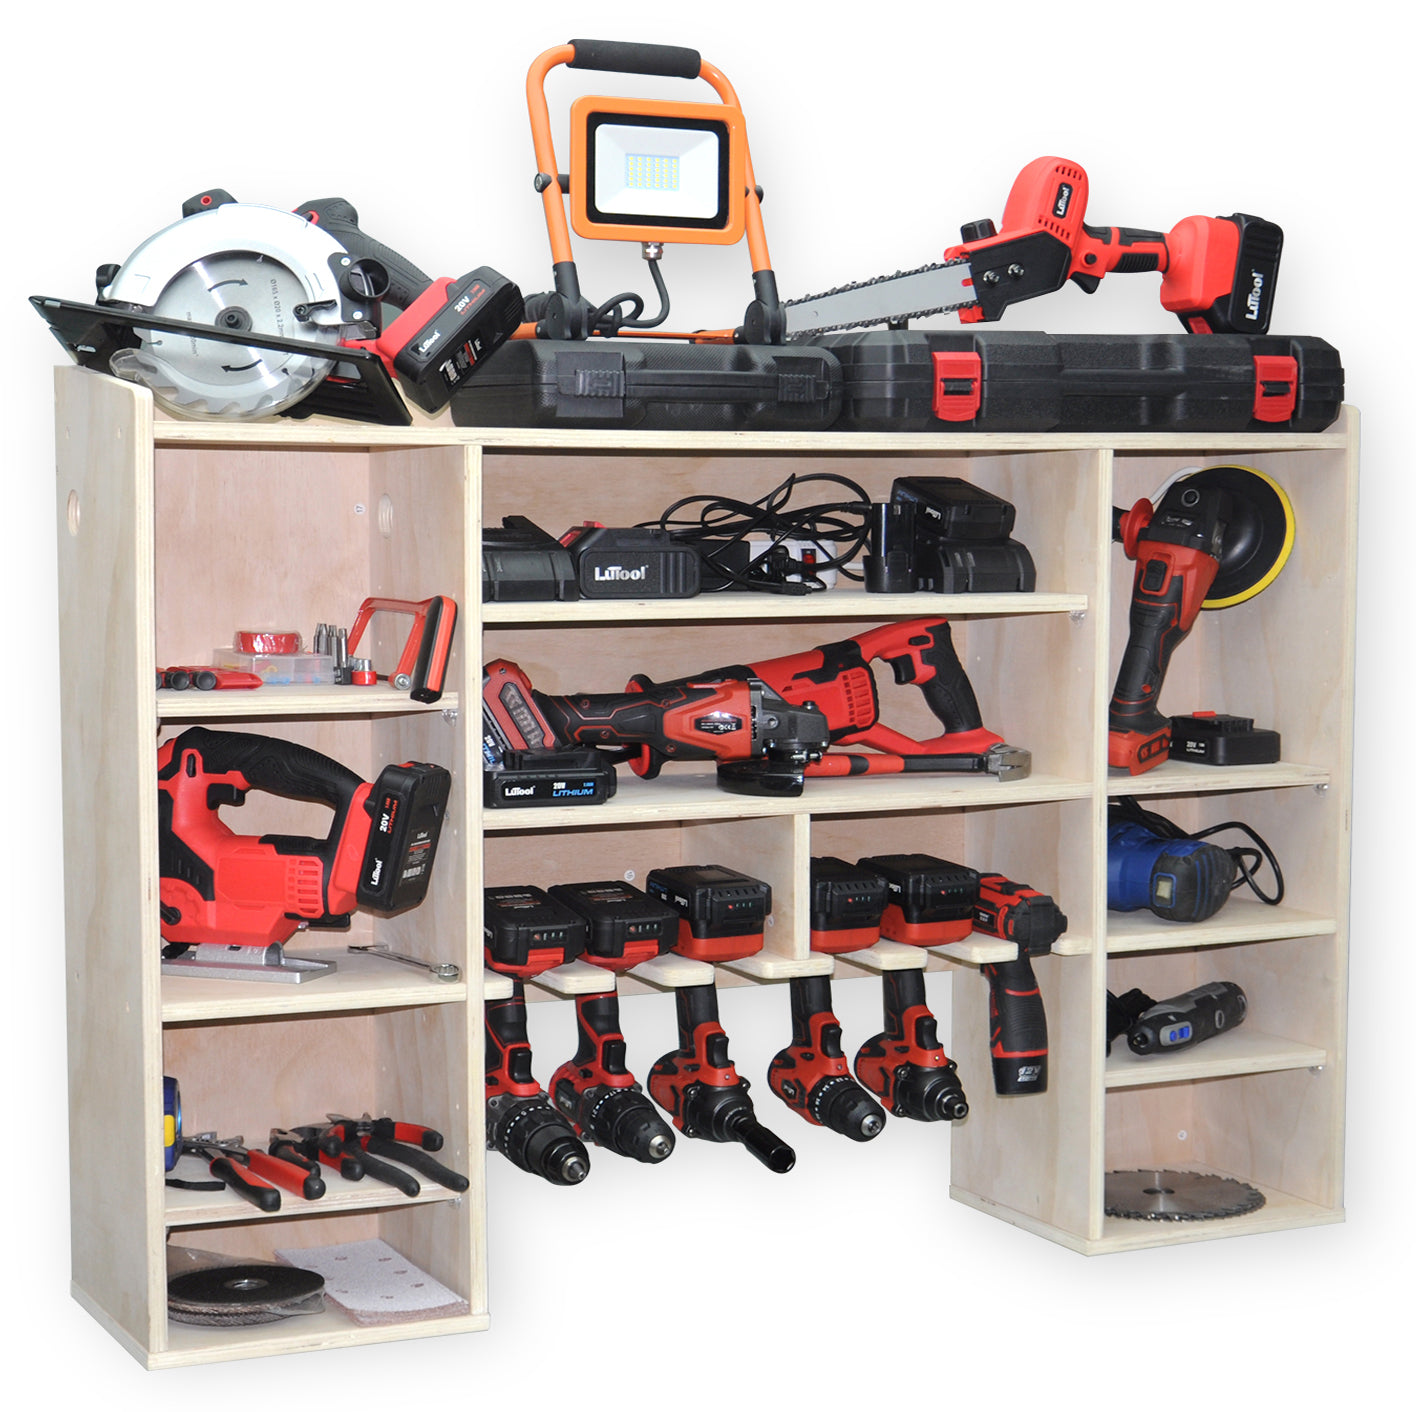 ZLQ METAL Power Tool Organizer With Charging Station,Drill Holder Wall  Mount,Garage Storage Shelves for